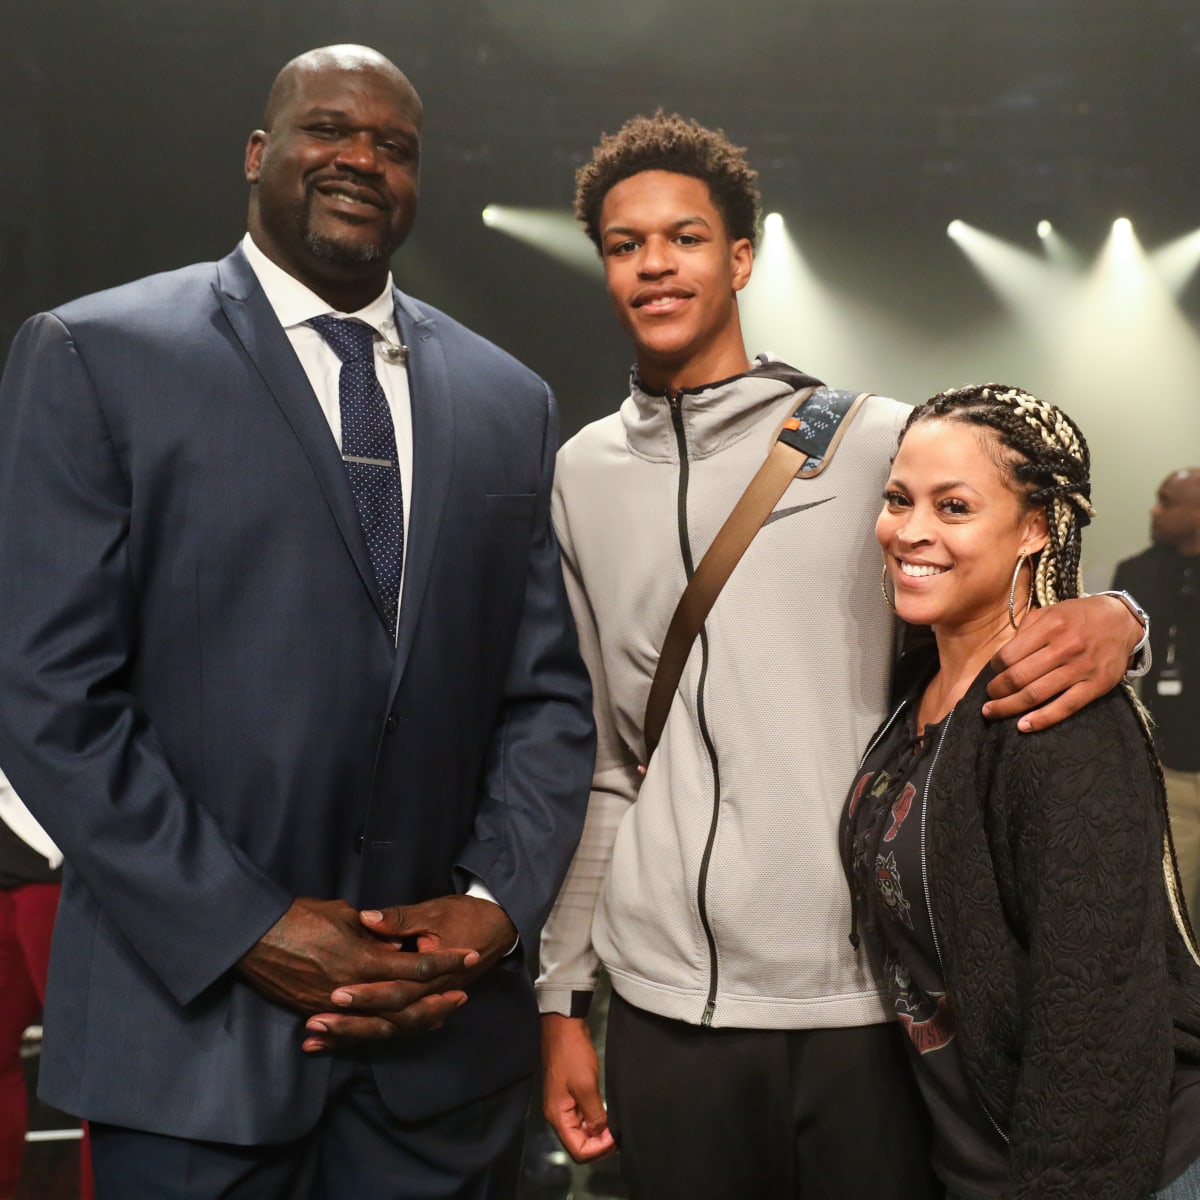 Shareef O'Neal says he butted heads with father Shaq over entering